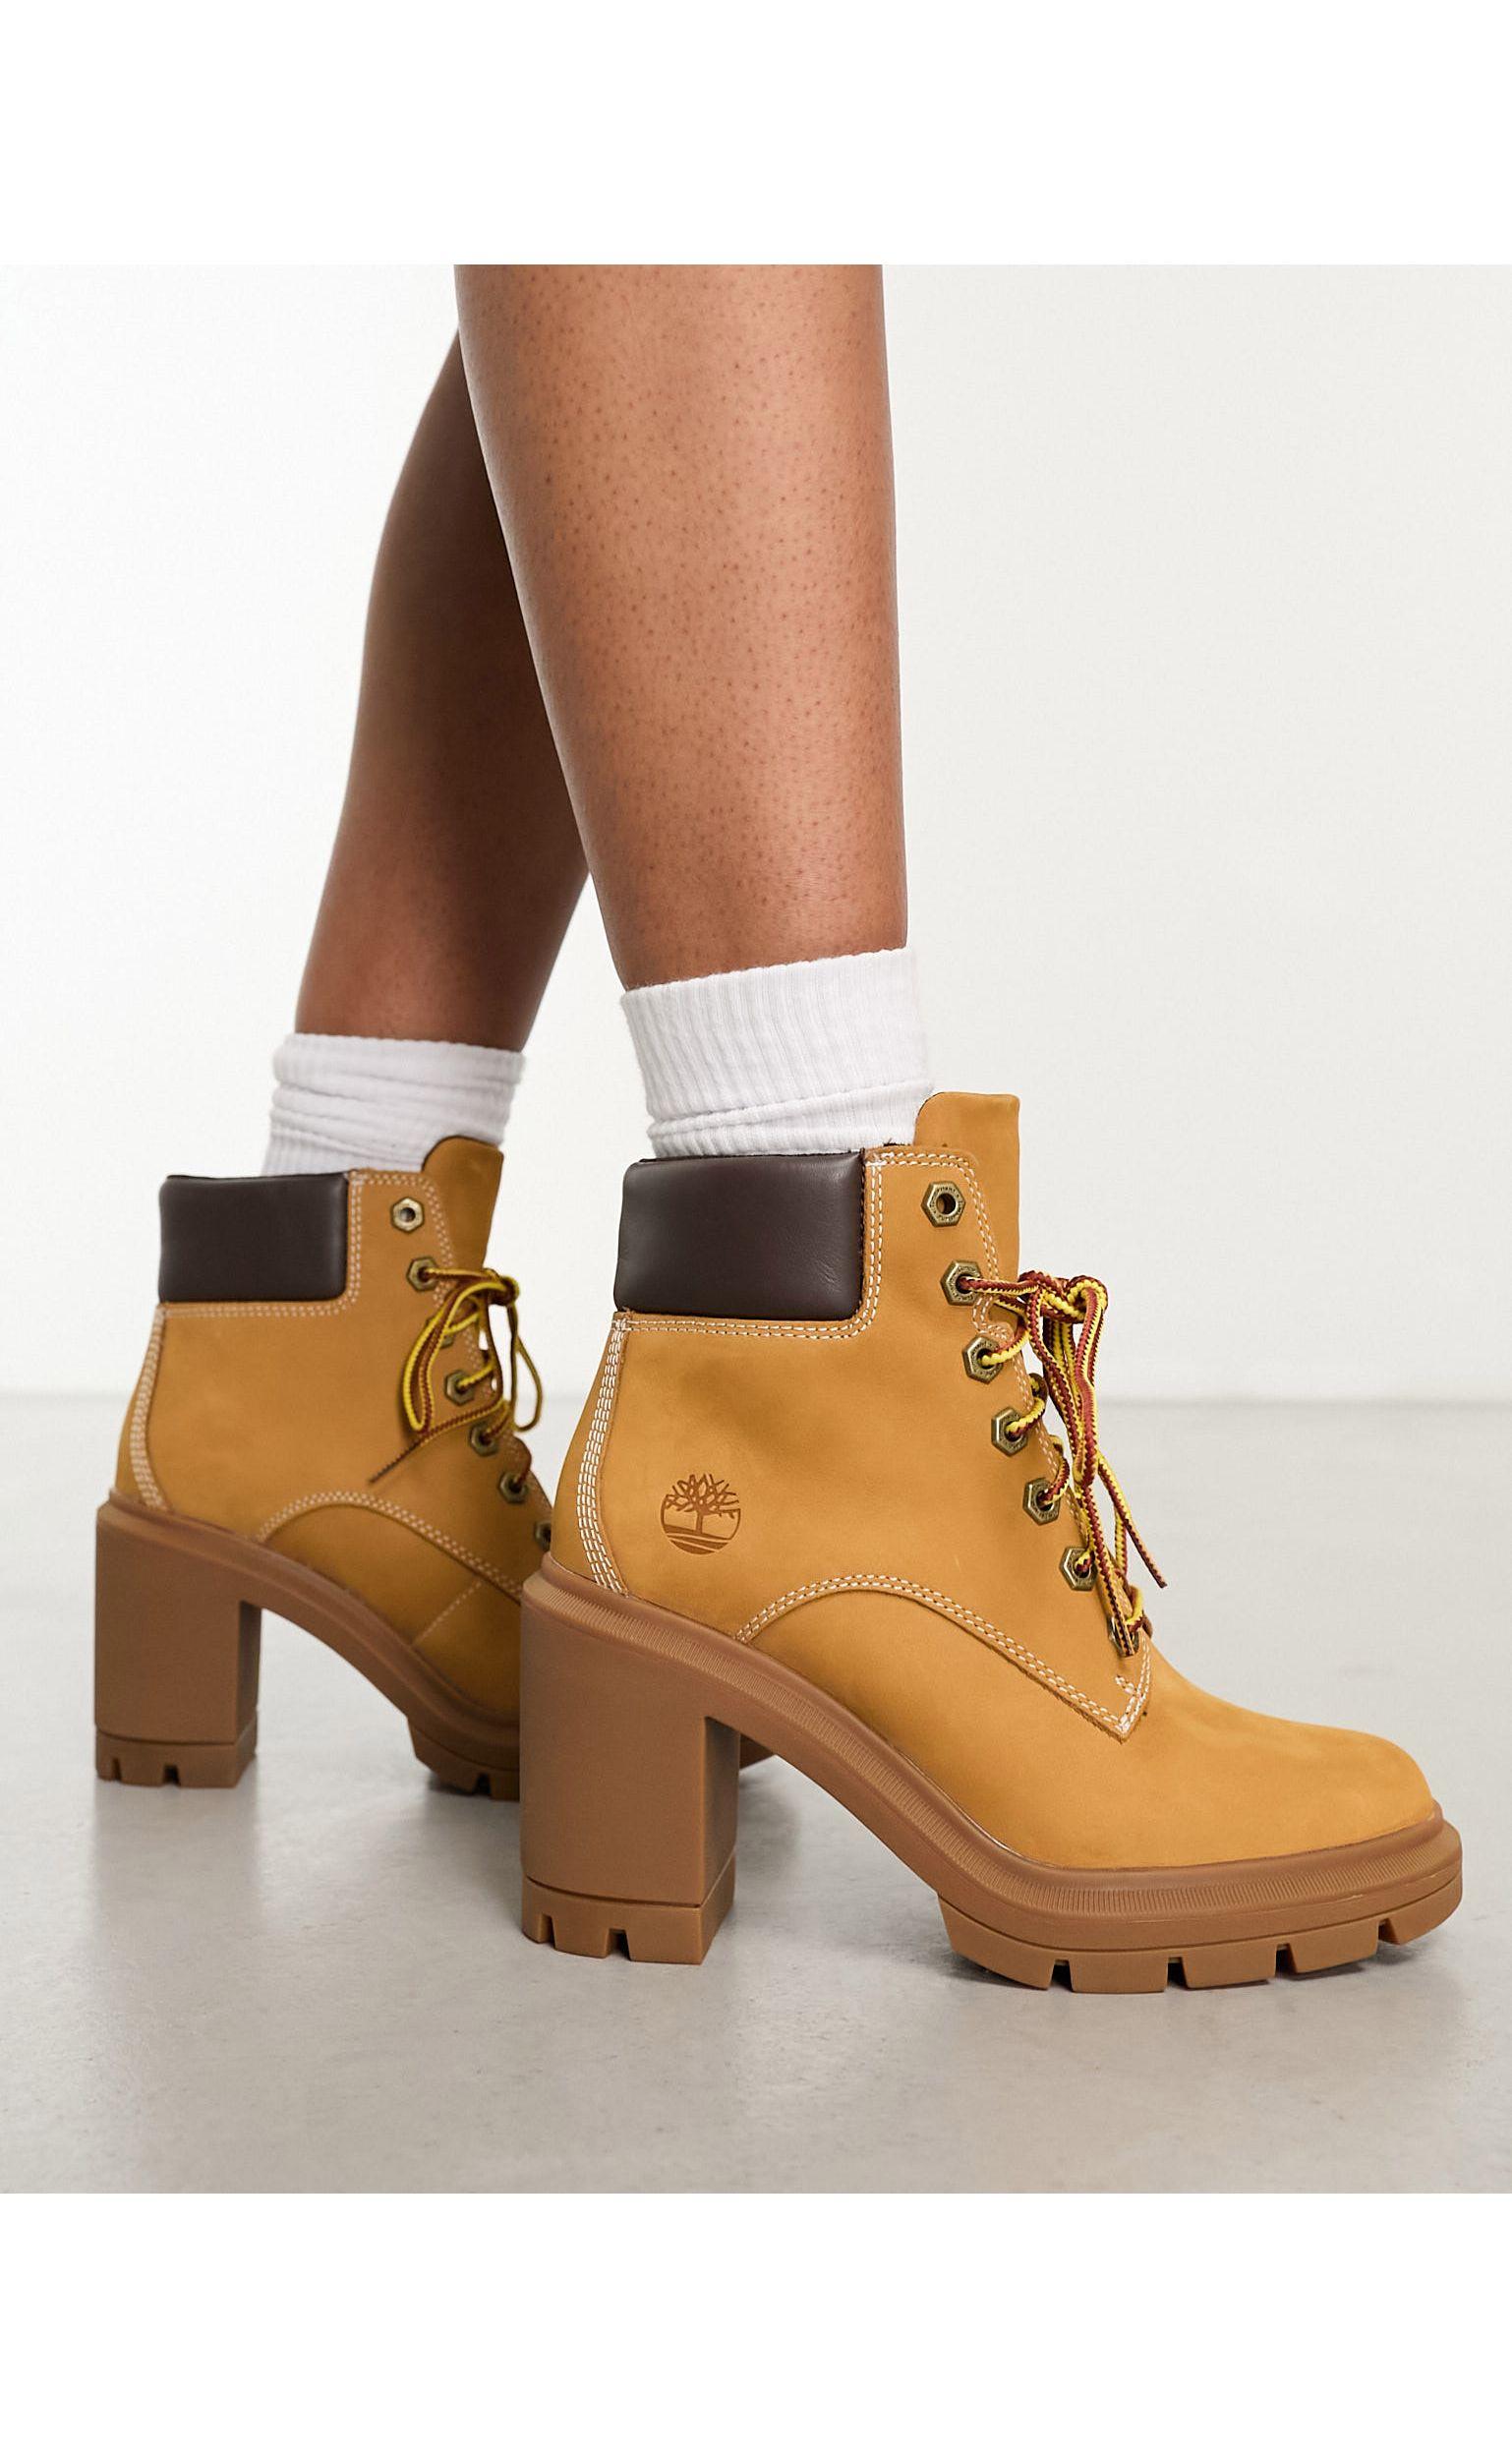 Timberland Allington Heights 6 Inch Heeled Boots | Lyst